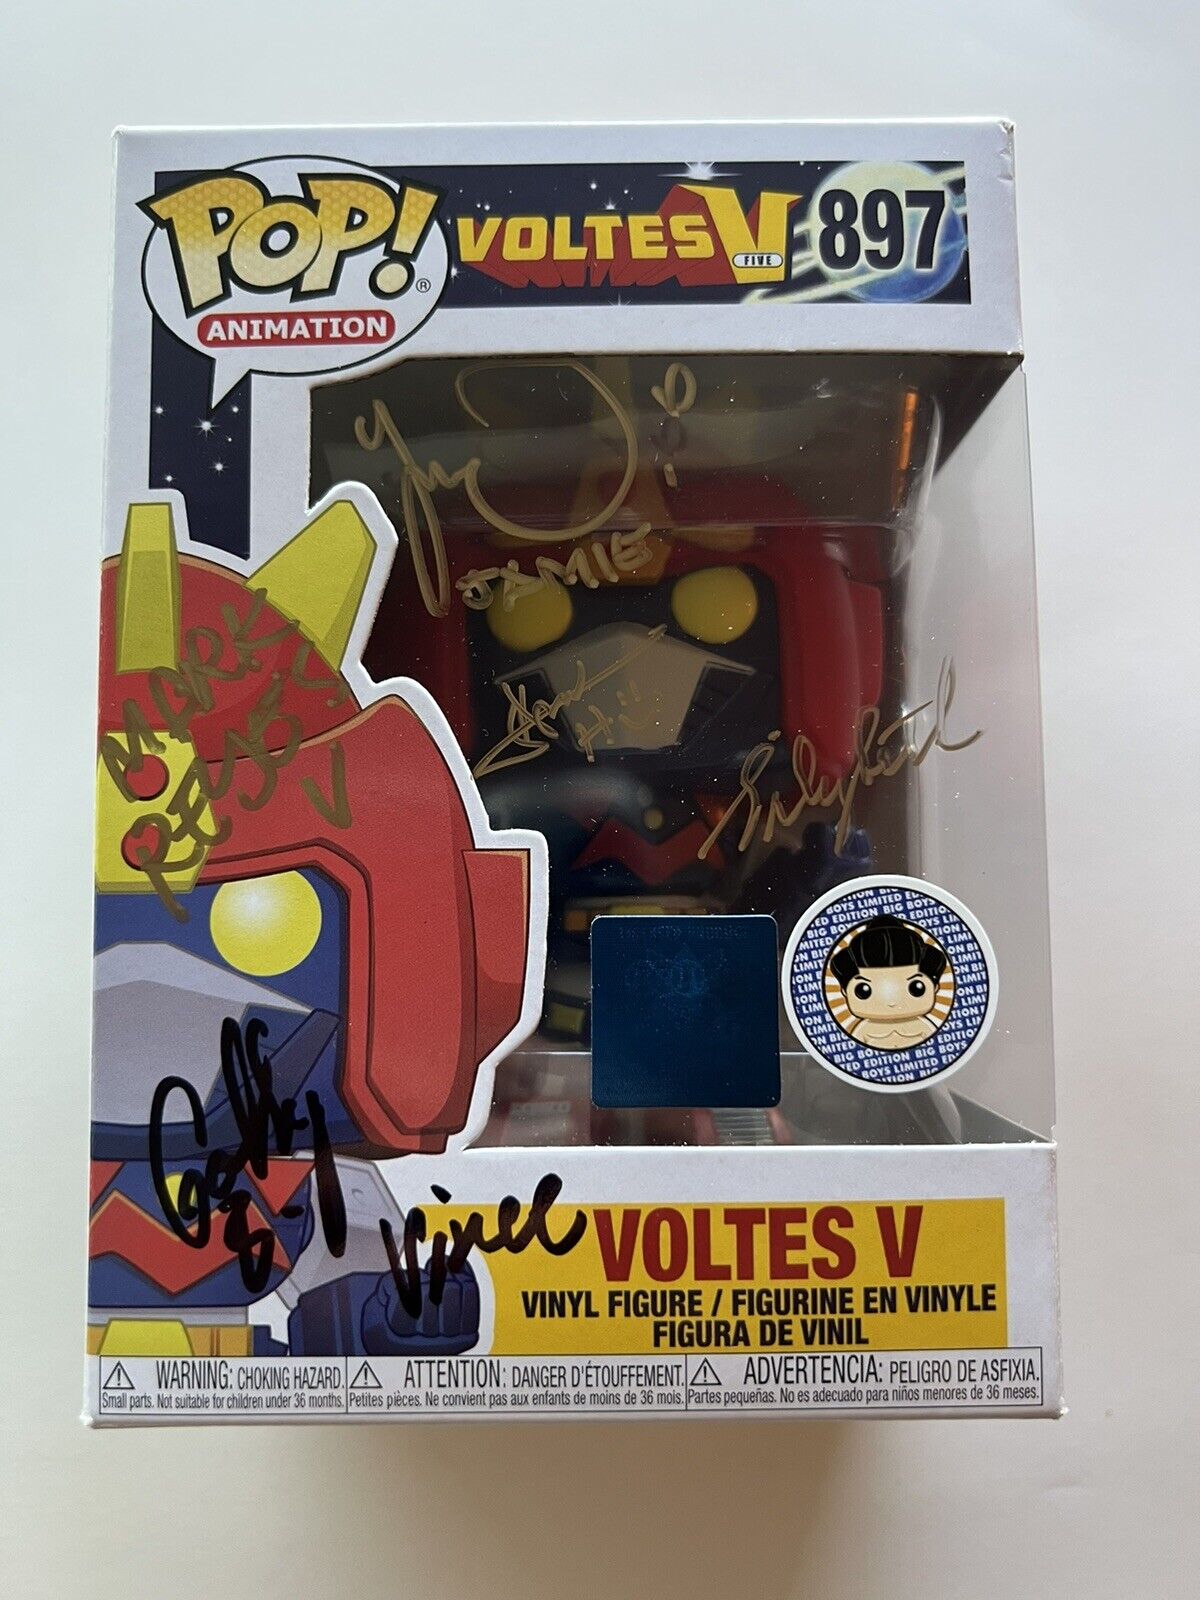 FUNKO POP VOLTES V 897 SIGNED 7X BY LEGACY CAST SDCC BIG BOYS EXCLUSIVE STICKER